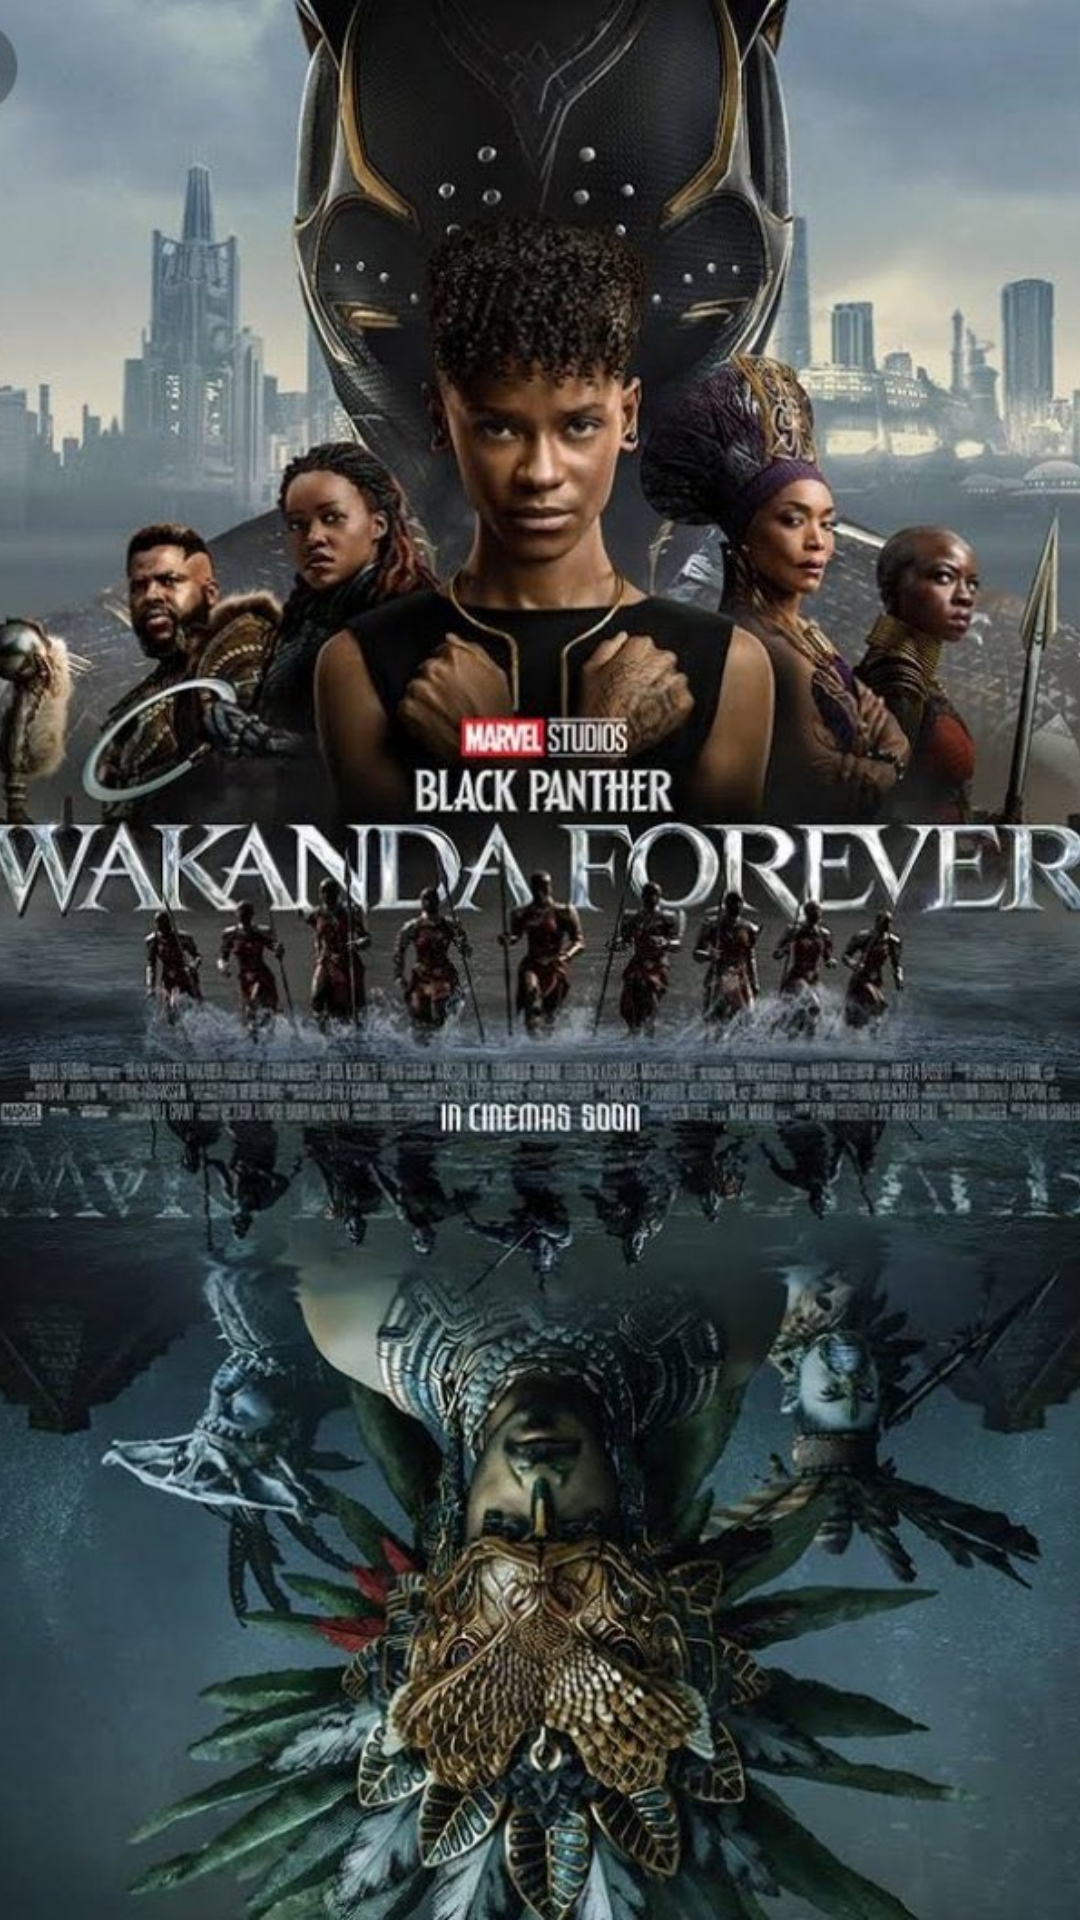 Meet Black Panther Wakanda Forever characters